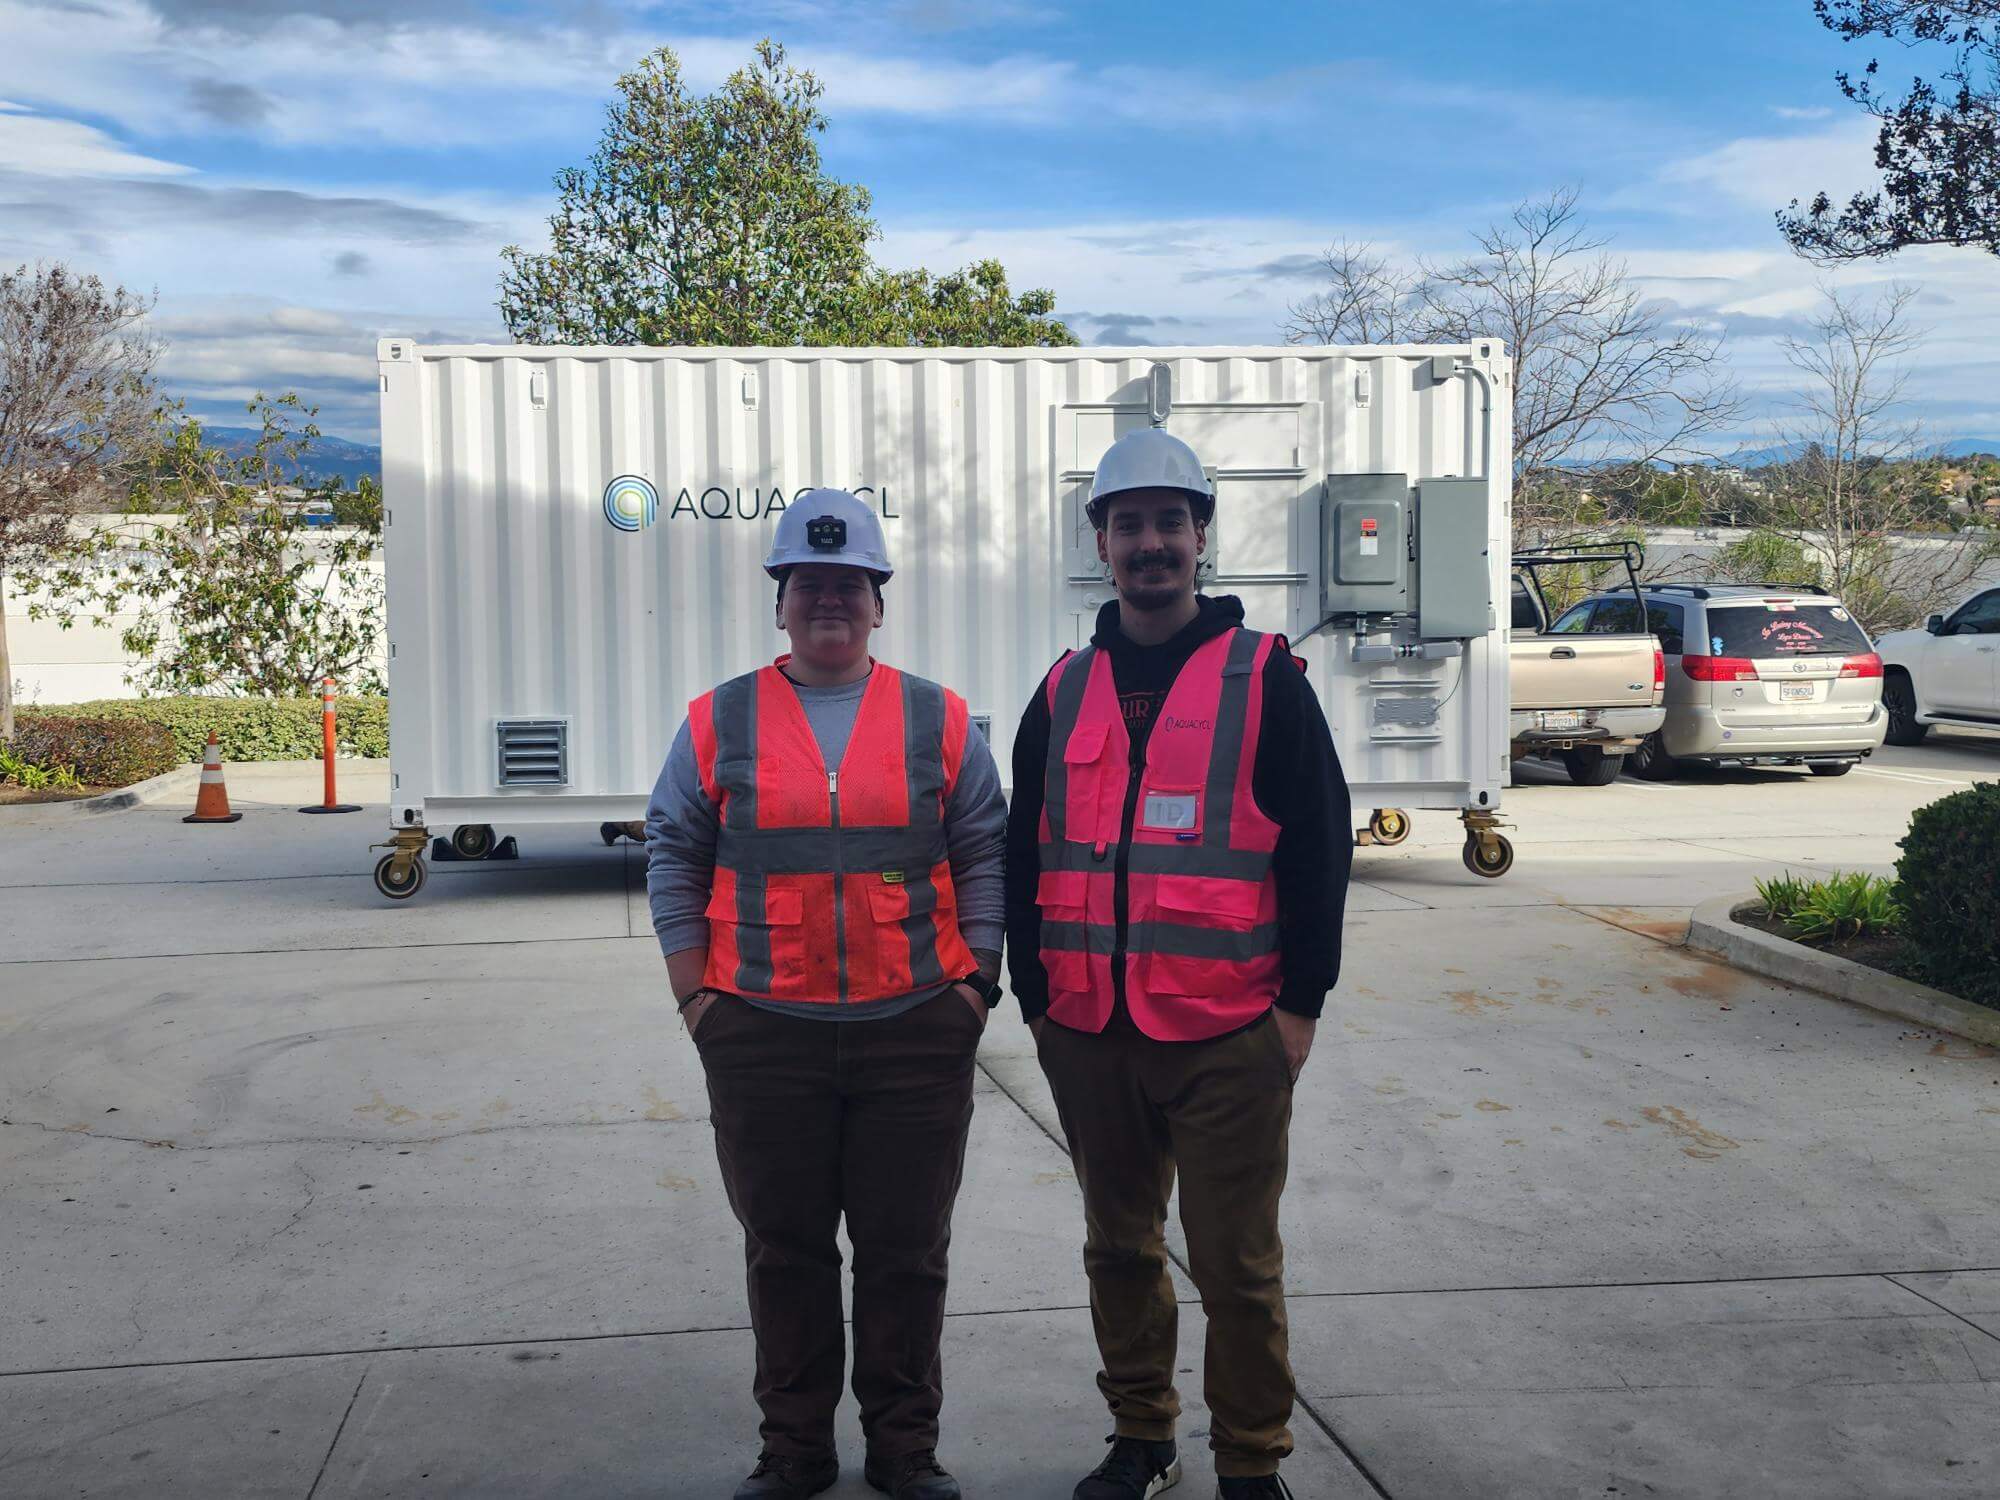 Two service technicians standing in front of an Aquacycl container